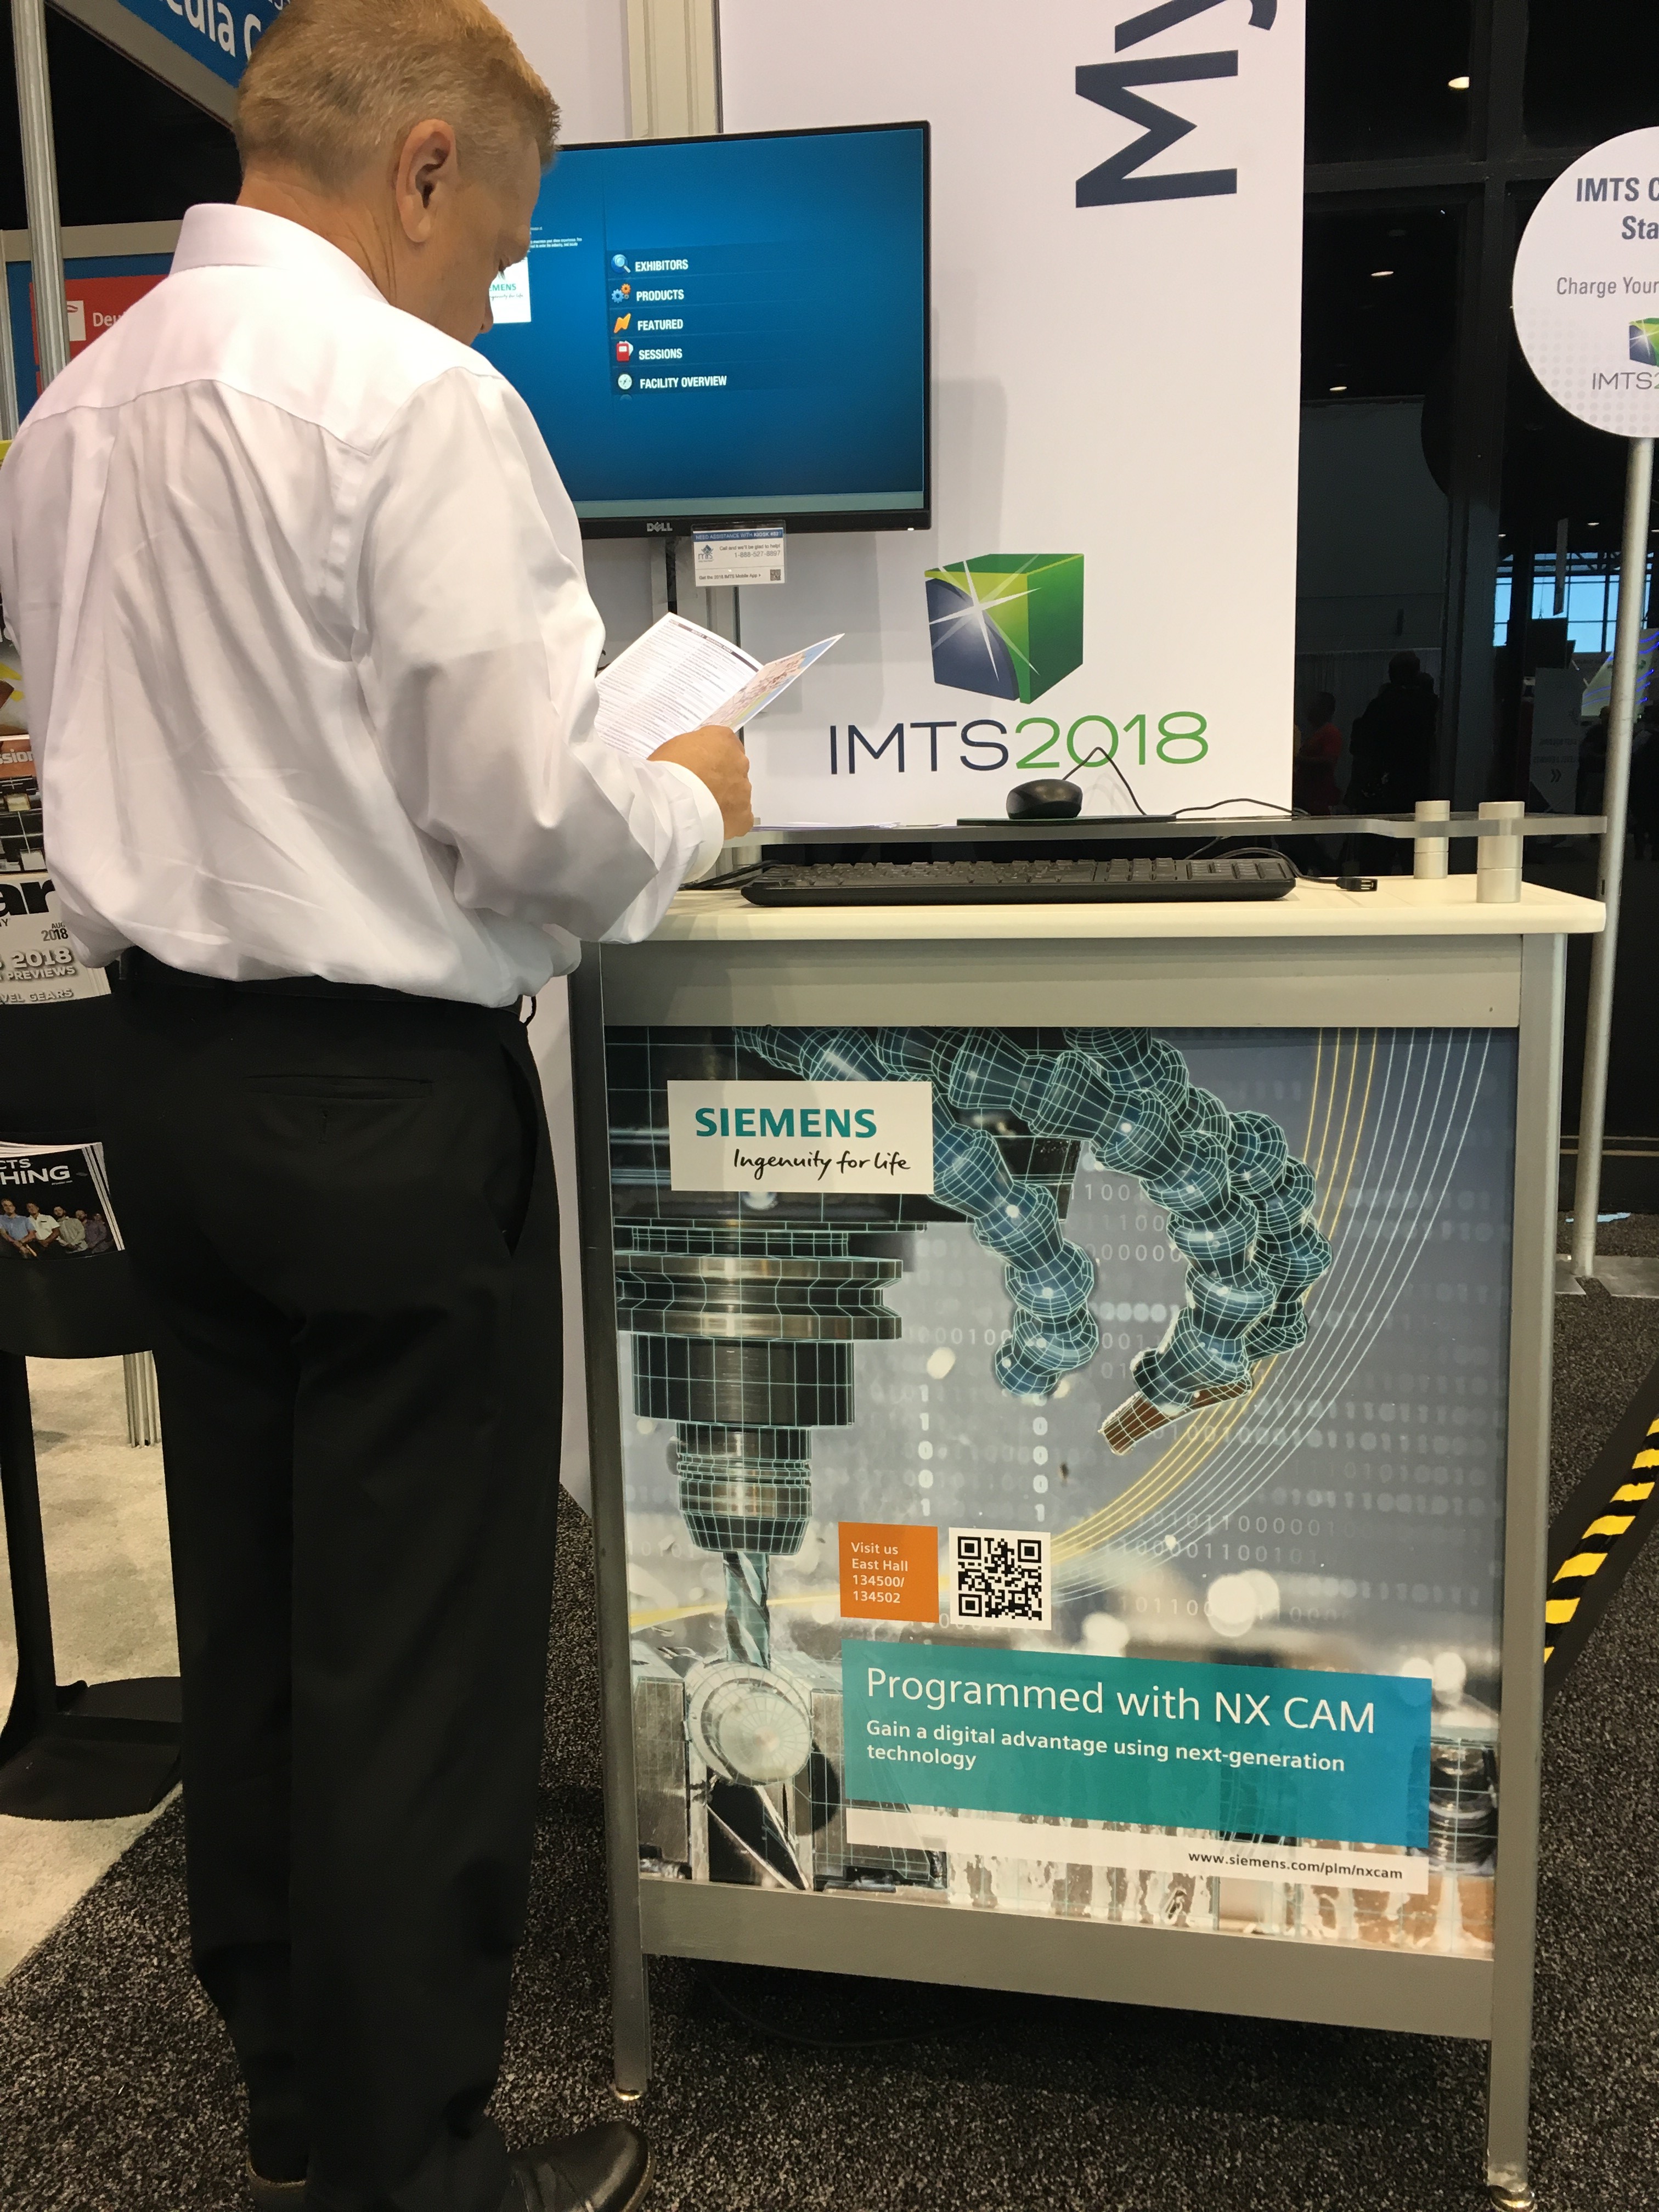 imts2018boothimage5.jpg